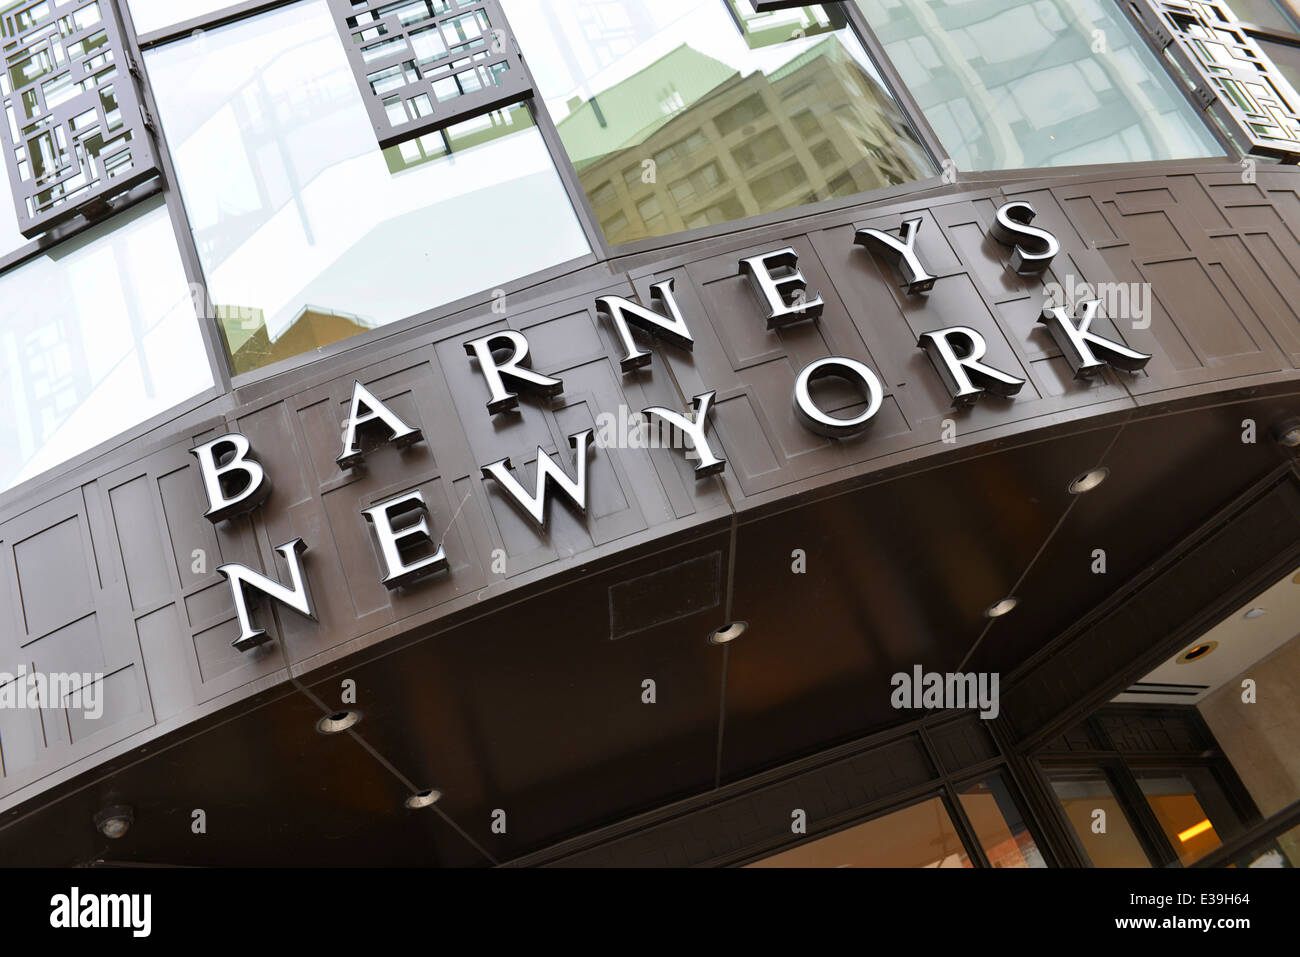 Art House to Take Over Barney's New York Building at 660 Madison